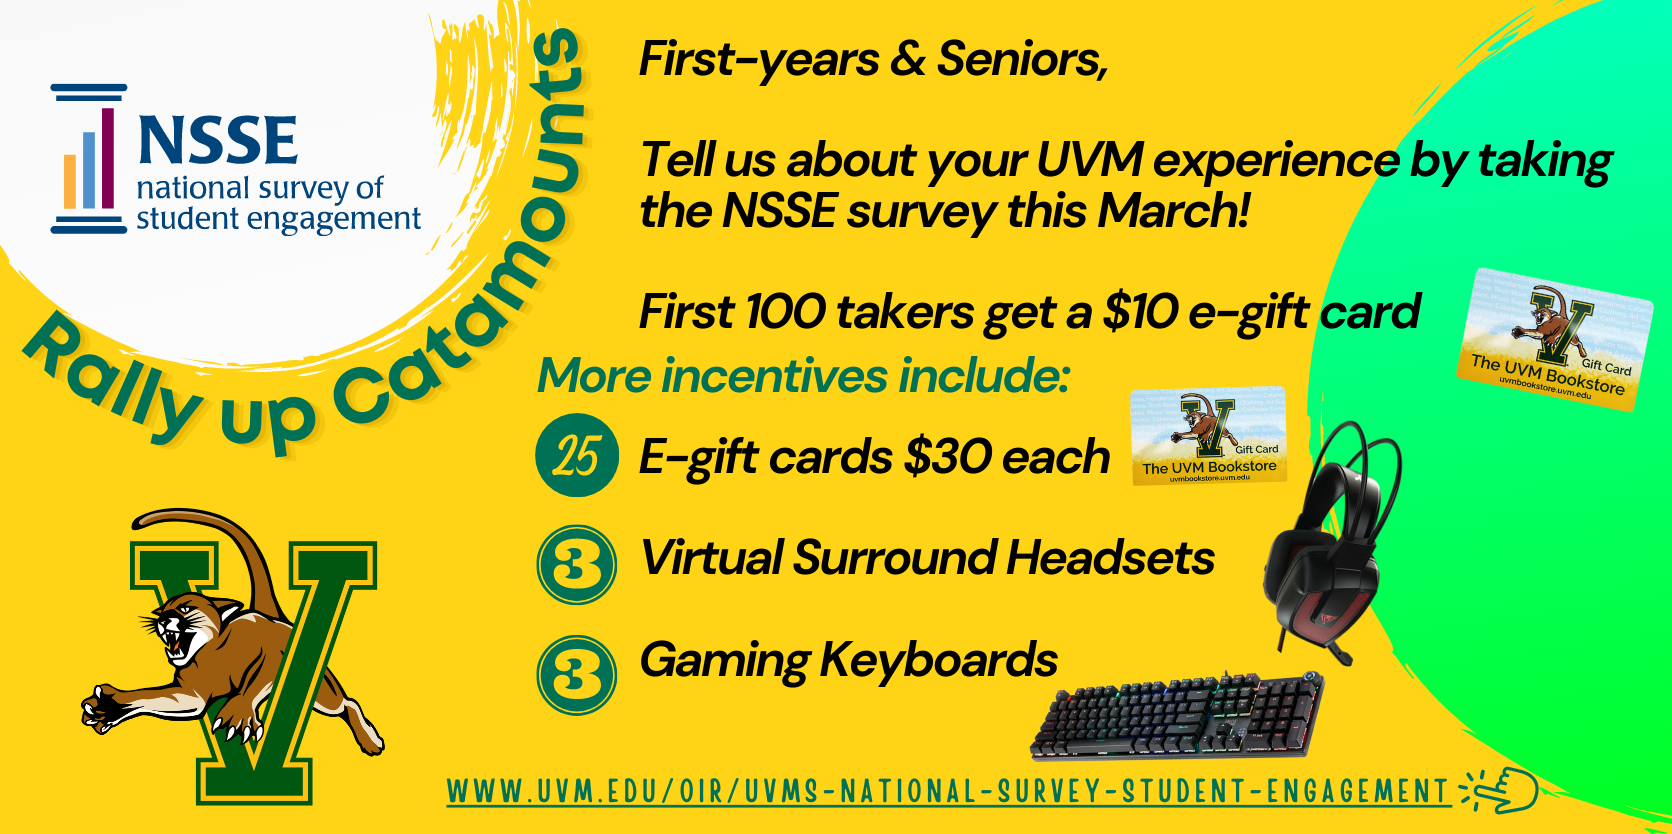 A landscape layout flyer that has some logos, pictures and text against a the UVM gold color background. The first logo is of NSSE placed at the top left corner against a while textured circle. Underneath the circle, the text says Rally up Catamounts. Underneath this text is UVM’s mascot catamount that appears to be pouncing out of an enlarged V alphabet symbolizing V for Vermont. The V alphabet appears in the UVM green color with UVM gold border. On the right side, there is neon green half-circle background, against which there is text on incentives that reads: Tell us about your UVM experience by taking the NSSE survey this March! First 100 takers get a $10 e-gift card. More incentives include 25 E-gift cards $30 each, 3 Virtual Surround Headsets and 3 Gaming Keyboards. Each of these incentives are accompanied by their photo – a gift card that has UVM catamount mascot pouncing out of UVM V alphabet icon and says UVM Bookstore, a black and deep red color headset and a black color keyboard in which keys appear backlit by rainbow-colored lights. At the very bottom of the flyer is a link to UVM’s NSSE website that reads: www.uvm.edu/oir/uvms-national-survey-student-engagement